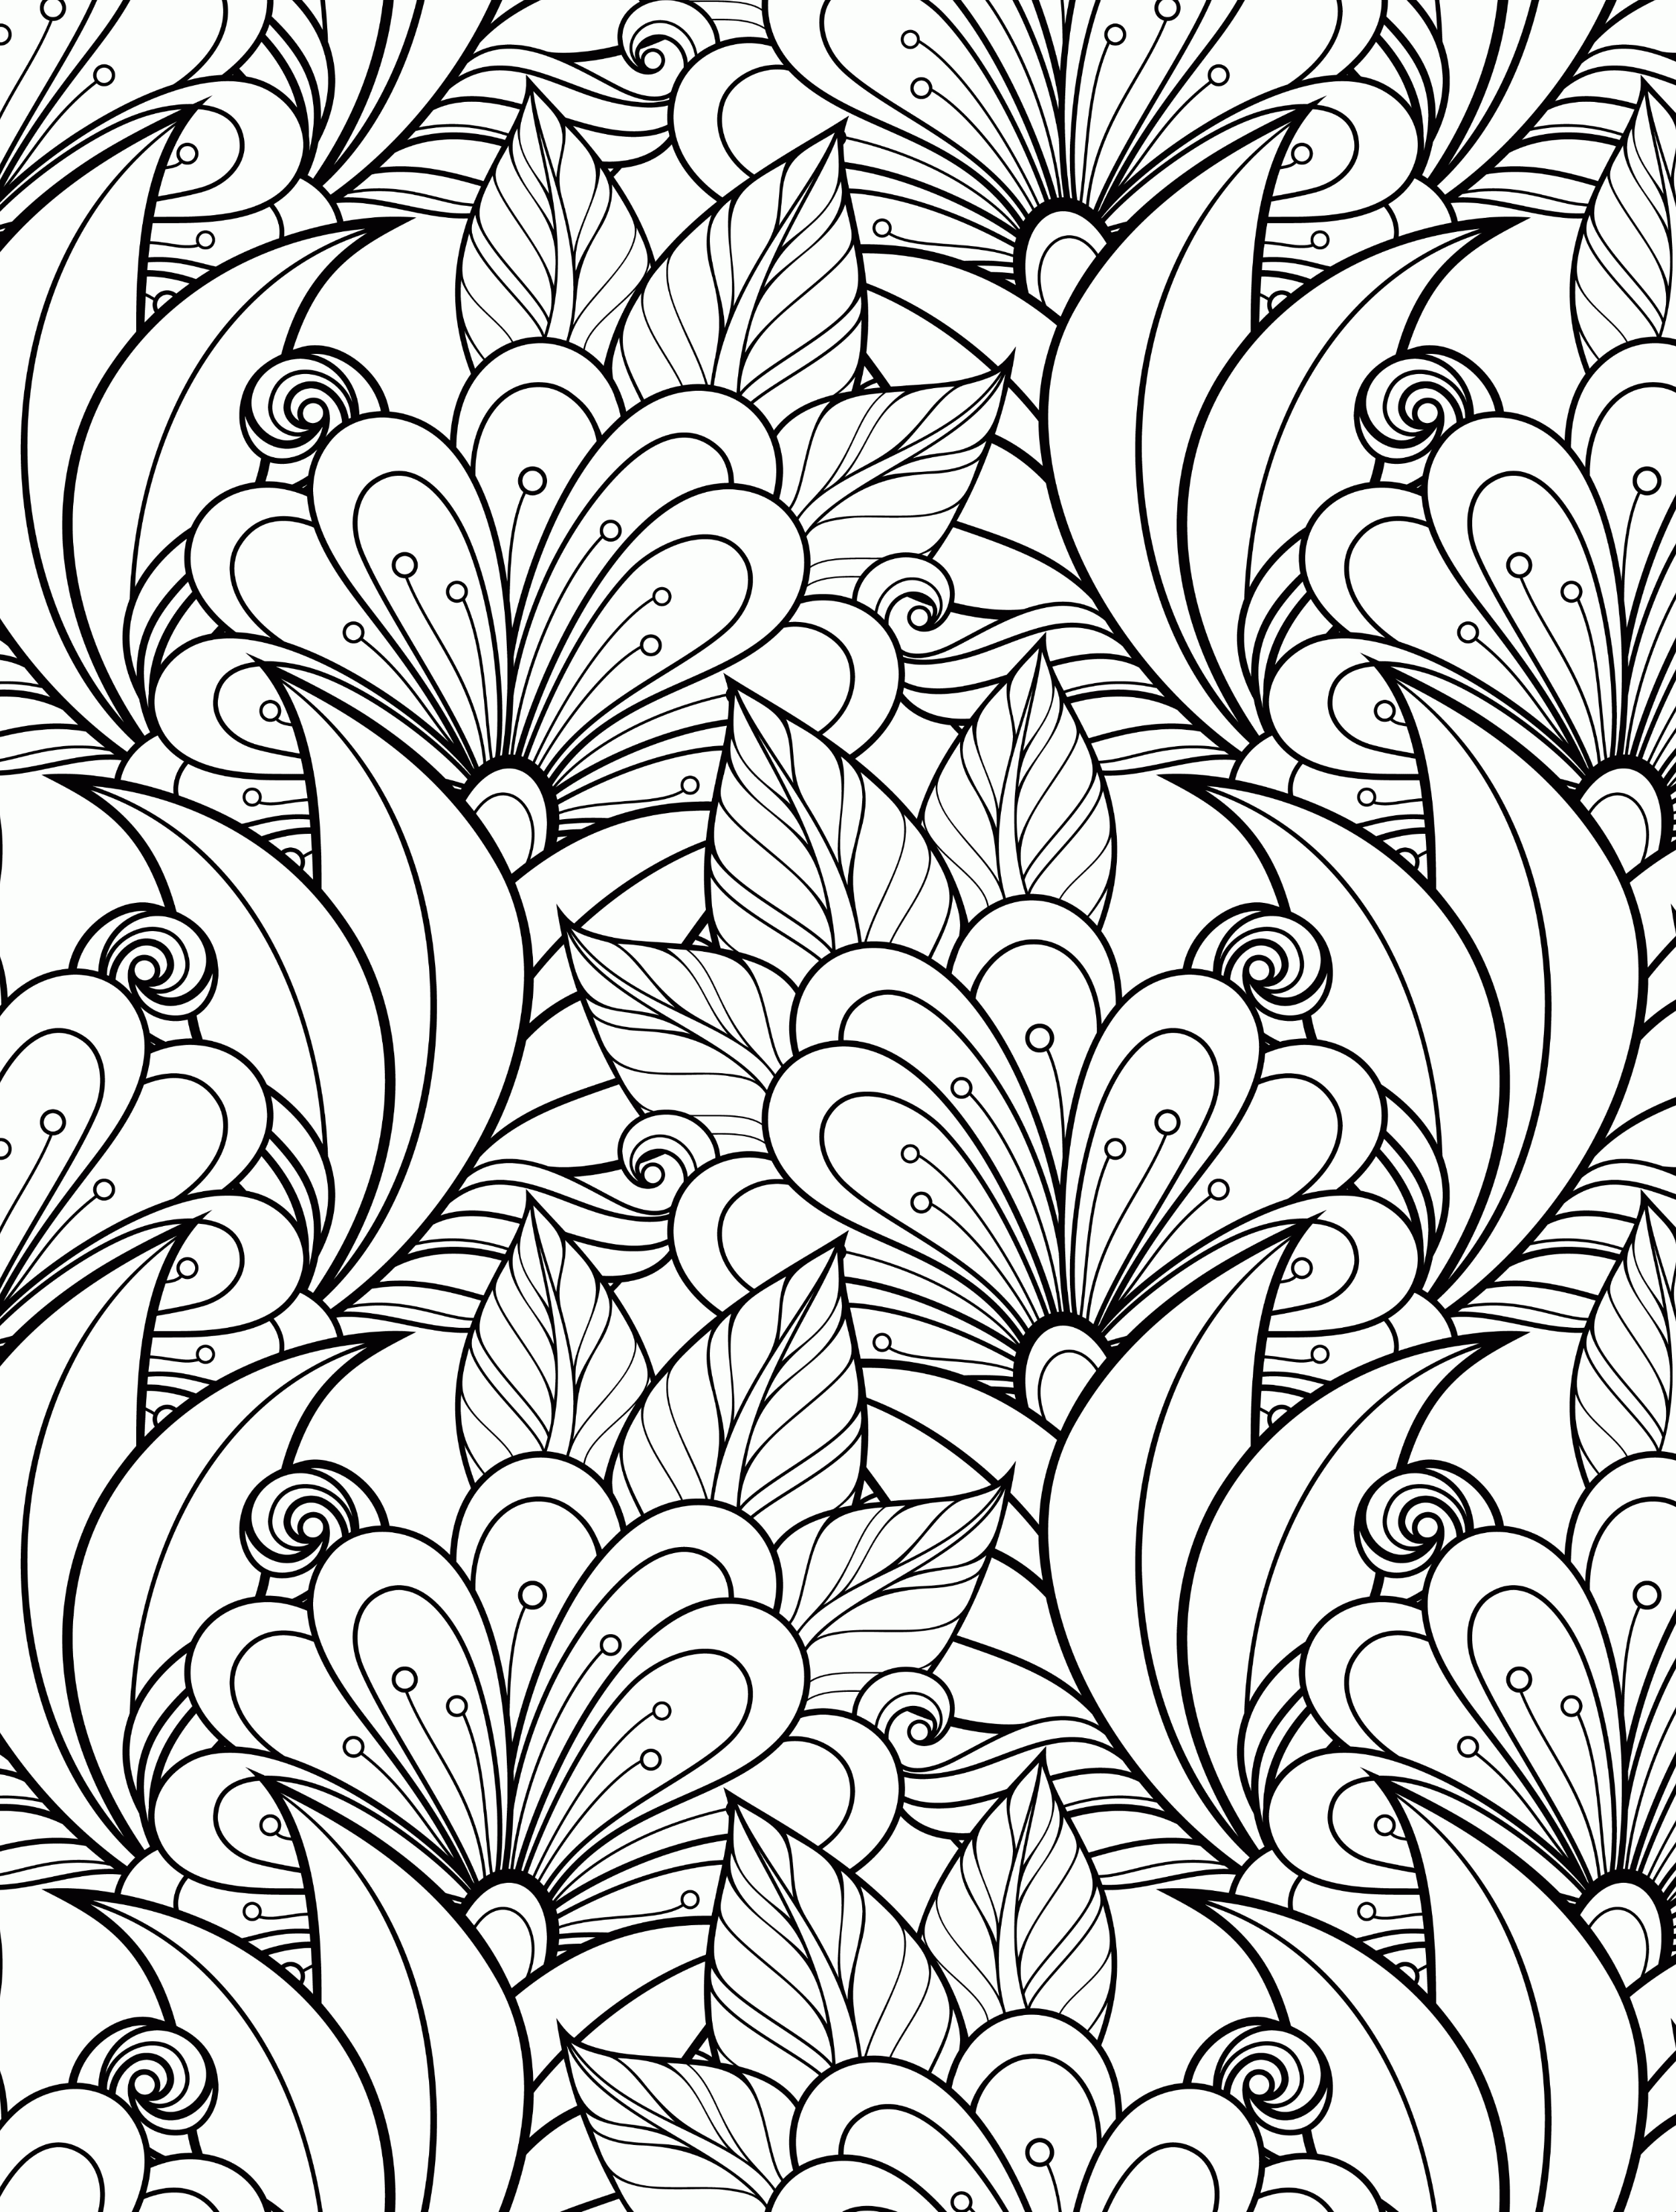 Download Free Printable Coloring Pages For Adults - Coloring Home